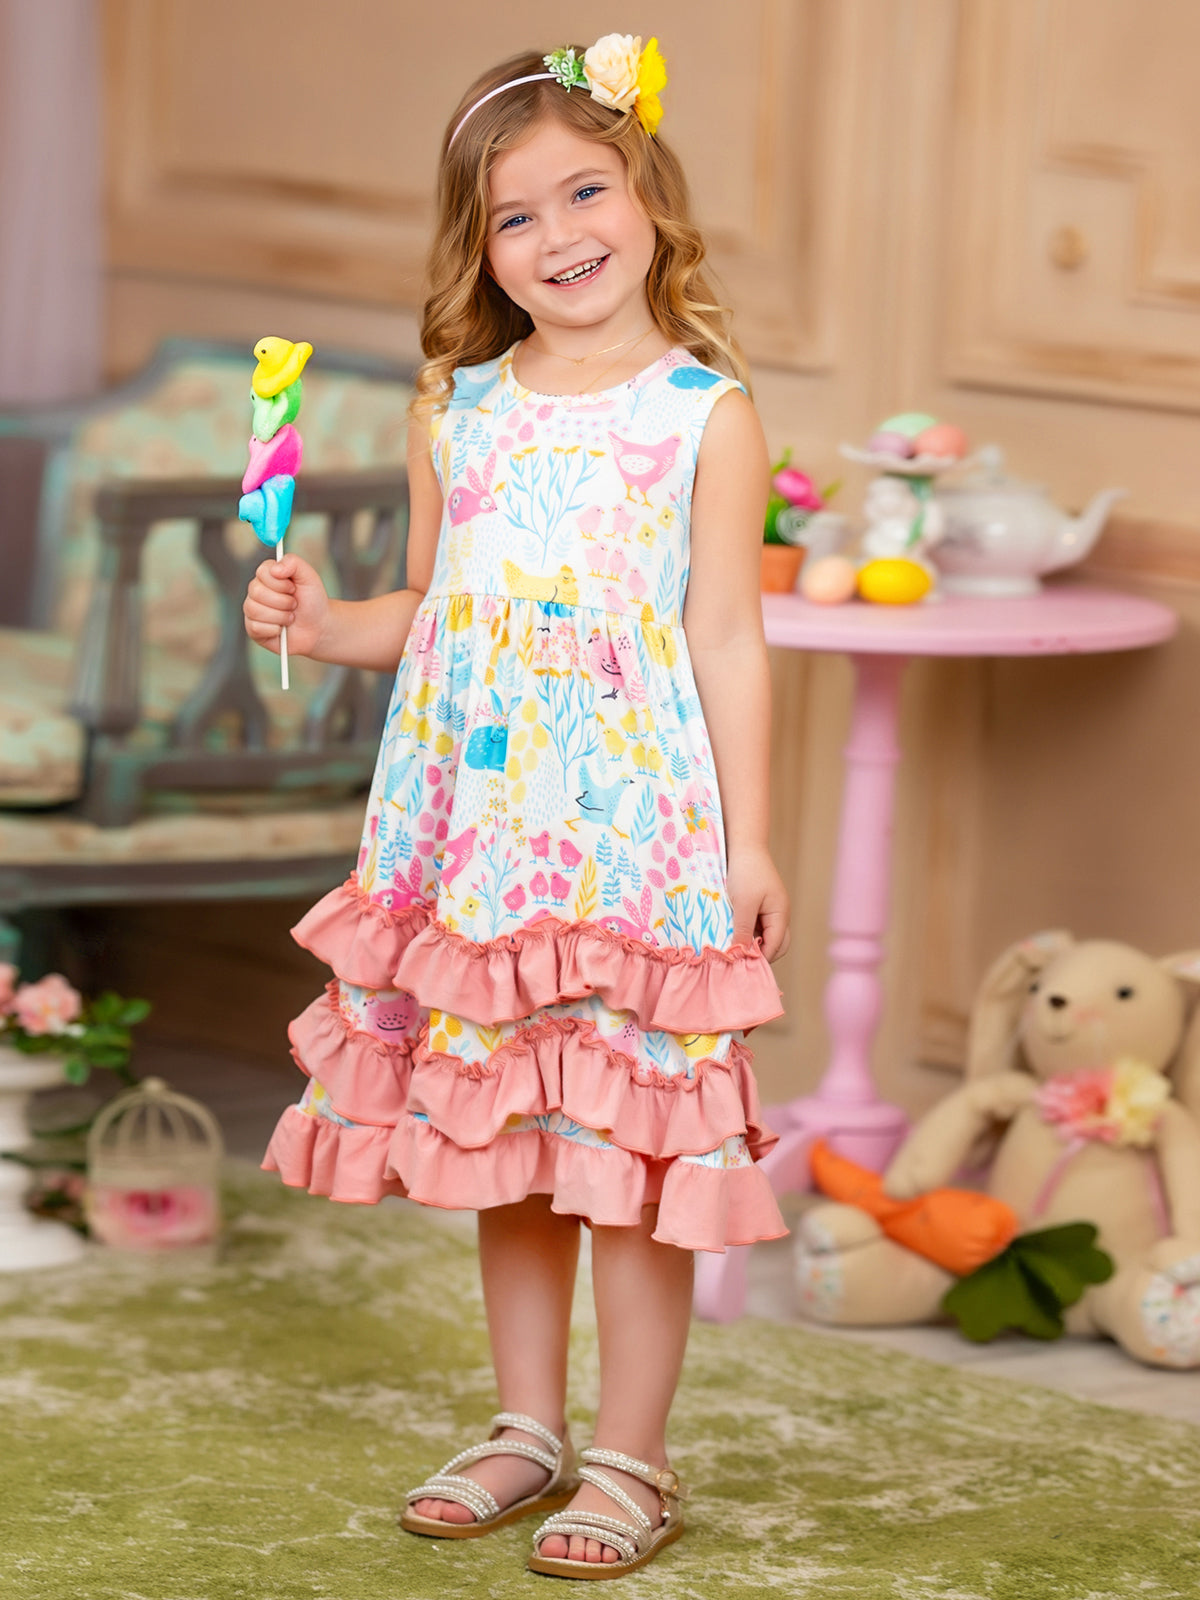 Casual dress features a tiered ruffled hem and a print that features animals (rabbits and chickens), florals, and leaves